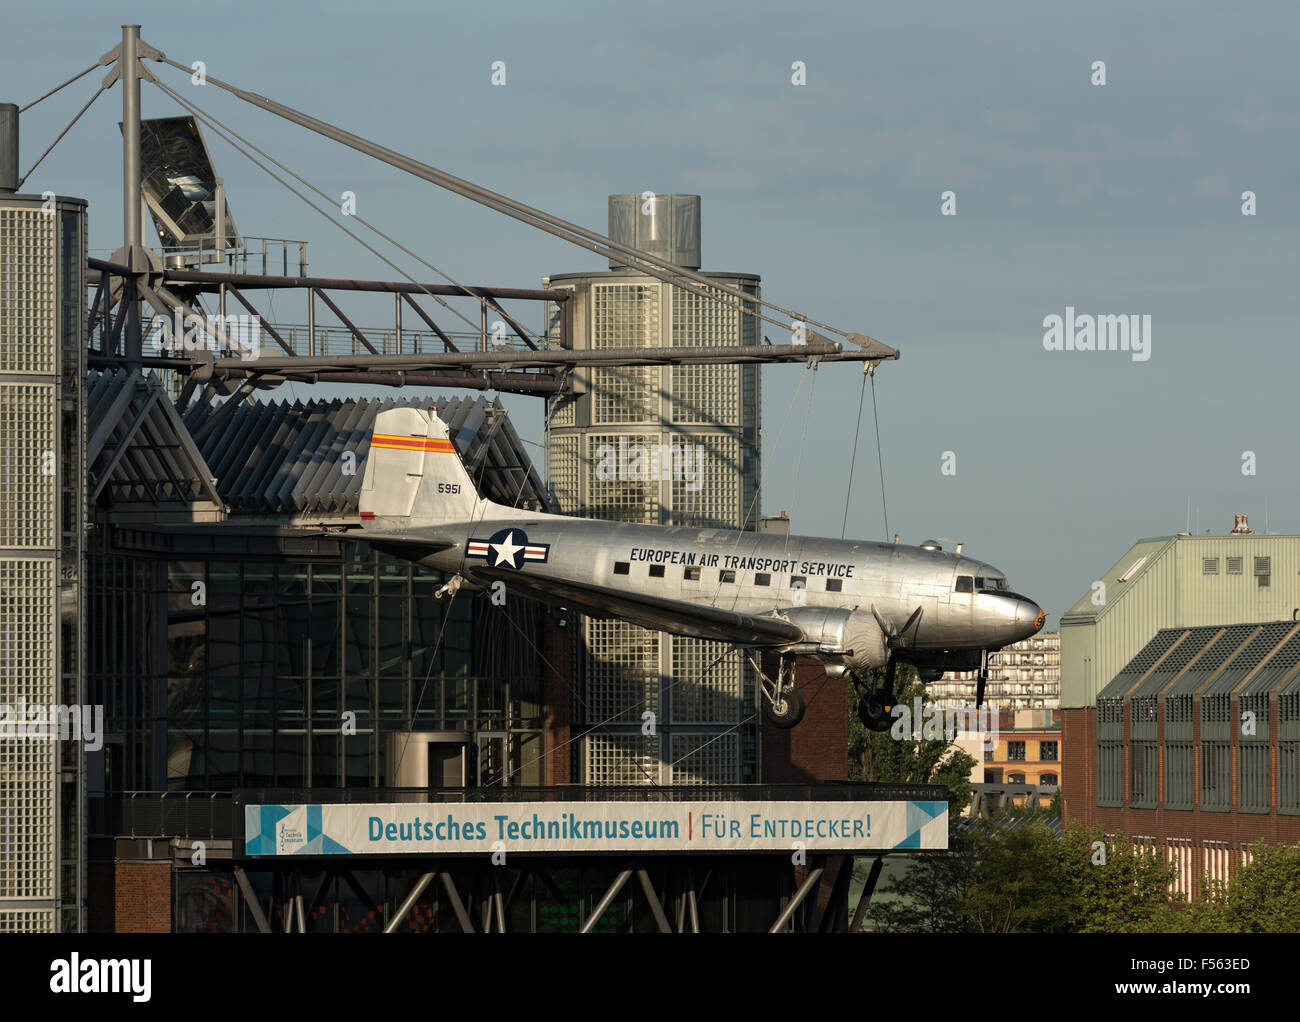 22.05.2015, Berlin, Berlin, Germany - Stiftung Deutsches Technikmuseum Berlin (SDTB), construction according to plans by the Berlin architects Ulrich Wolff and Helge Pitz. In approximately 30 m height, the C-47 floats with the Reg .: 45-0951 as landing direction Potsdamer Platz. European Air Transport Service (EATS), the Douglas C-47 Skytrain B (military cargo version / transport version of the passenger version of Douglas DC-3) formed during the Second World War, the backbone of the American Lufttransportverbaende. In the Berlin blockade in 1948/49, the C-47 were used as Candy Bombers, the sh Stock Photo